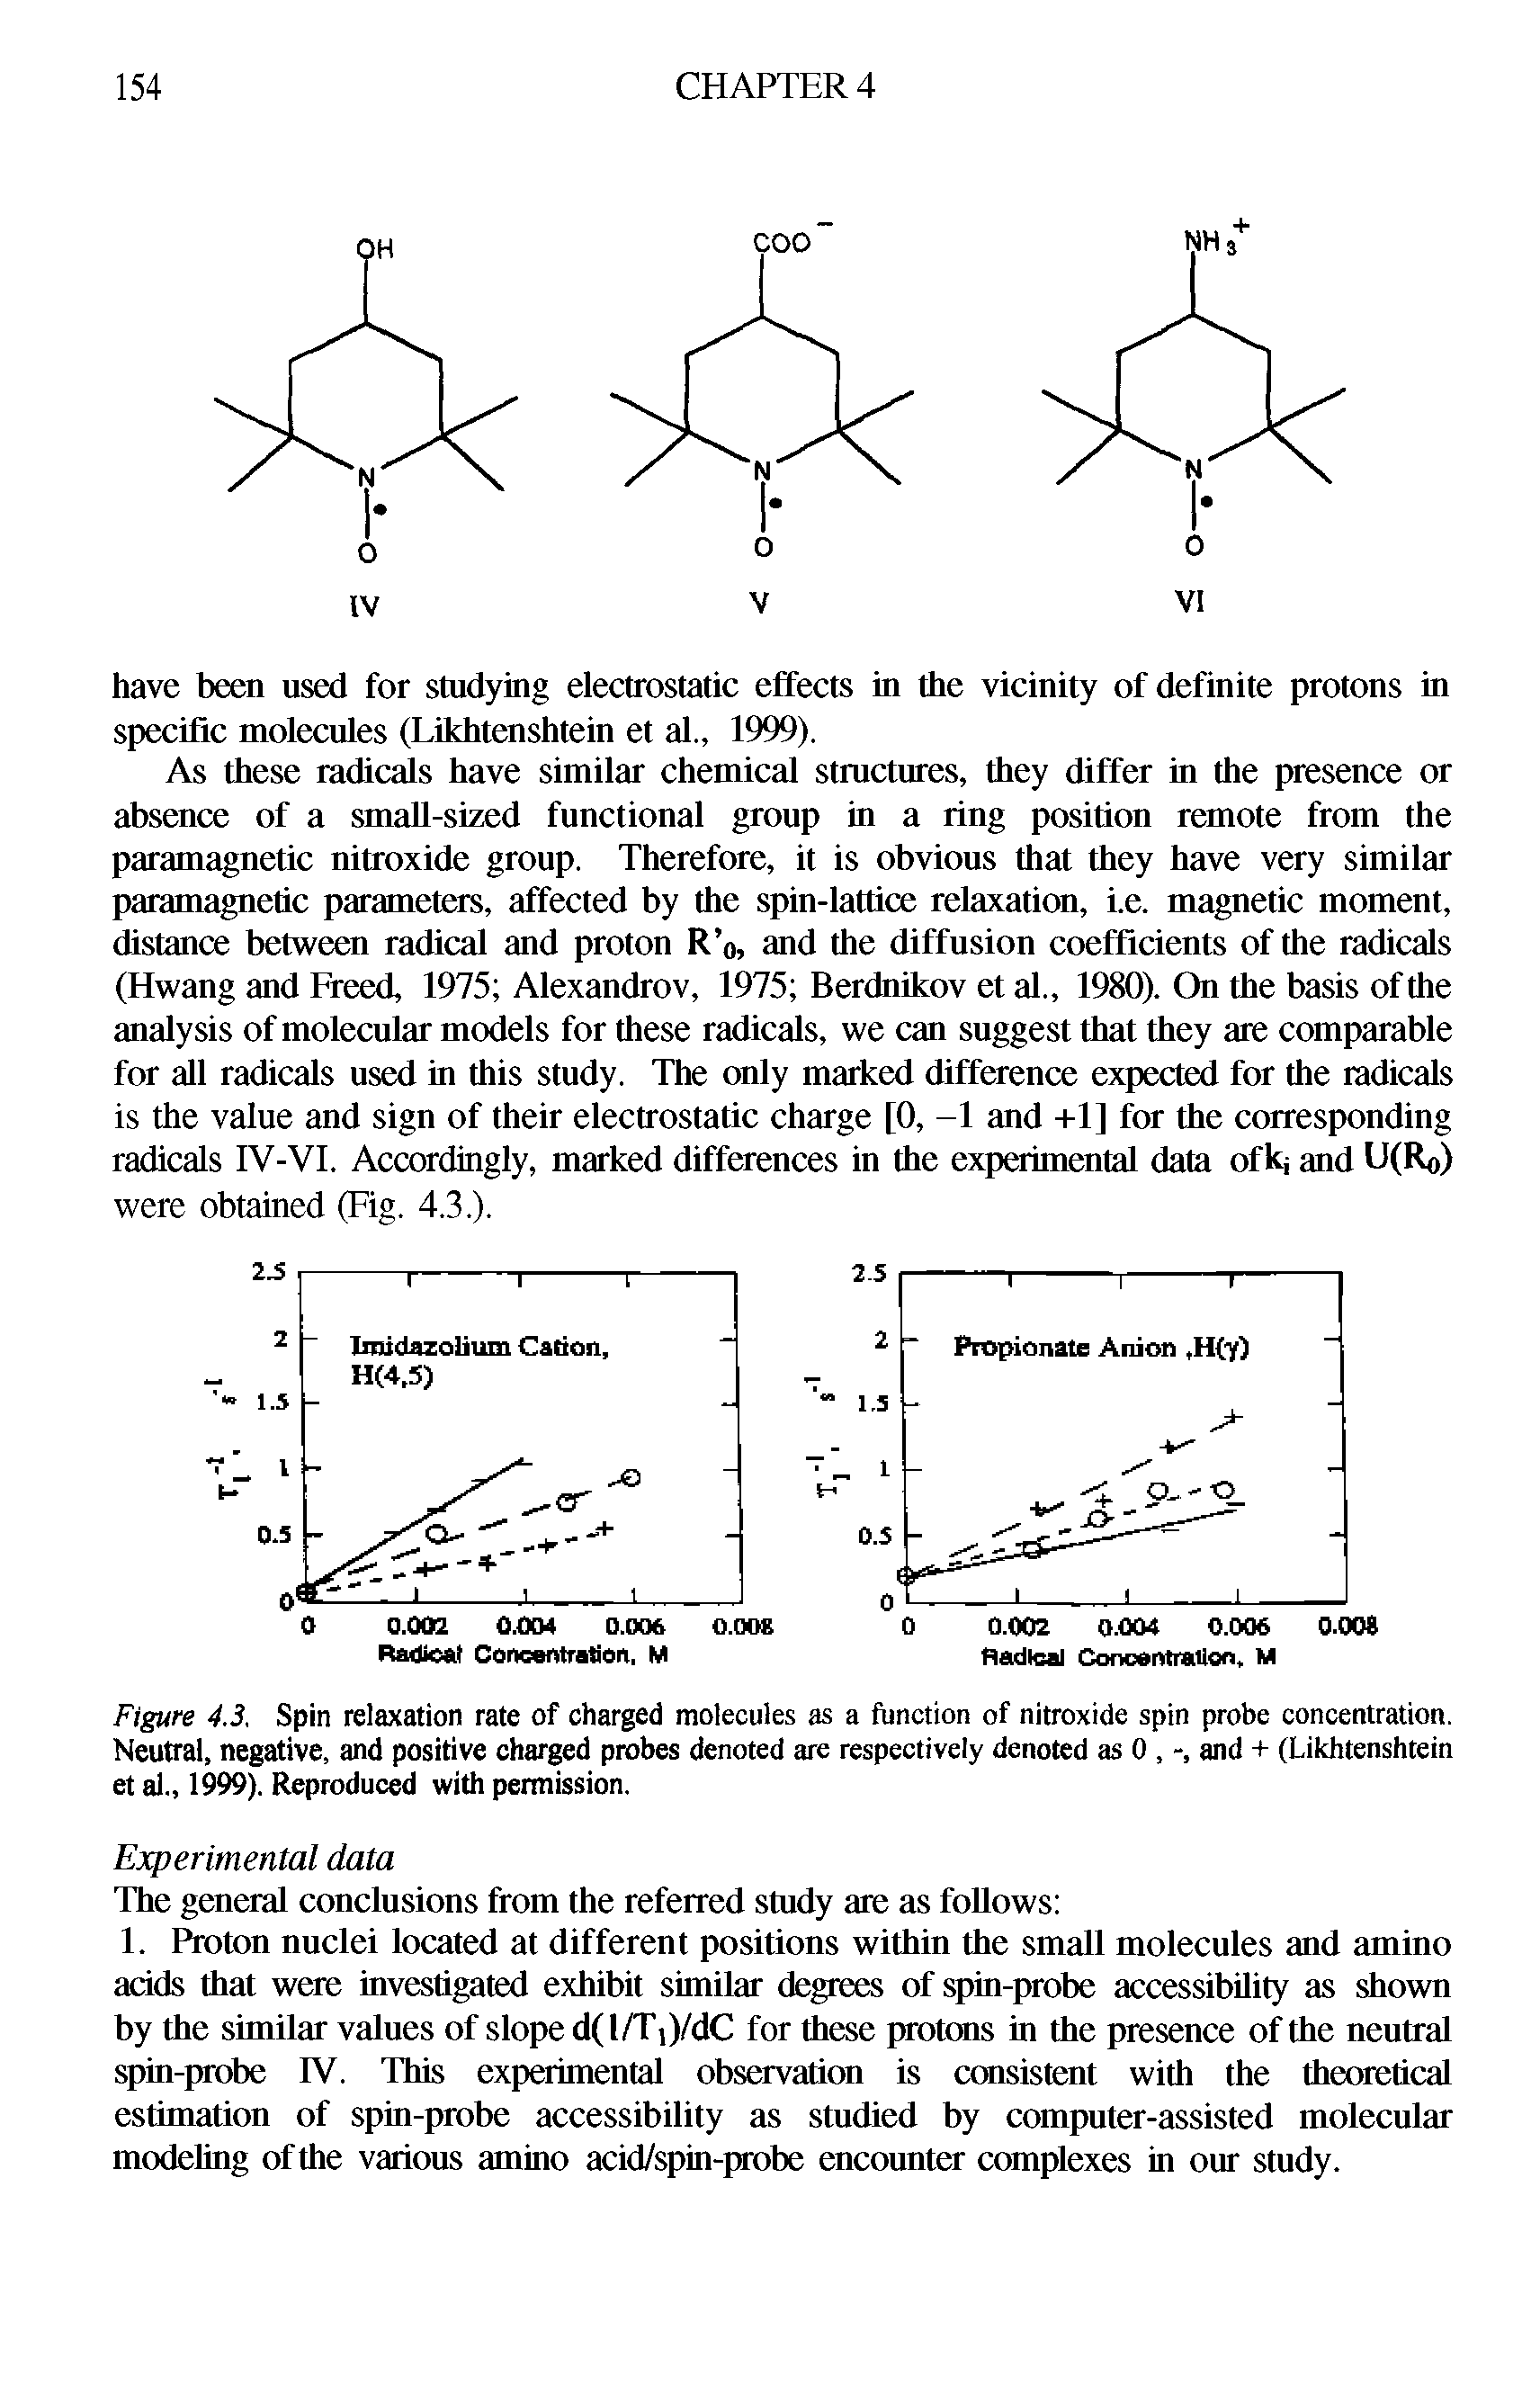 Figure 4.3. Spin relaxation rate of charged molecules as a function of nitroxide spin probe concentration. Neutral, negative, and positive charged probes denoted are respectively denoted as 0, -, and + (Likhtenshtein et al., 1999). Reproduced with permission.